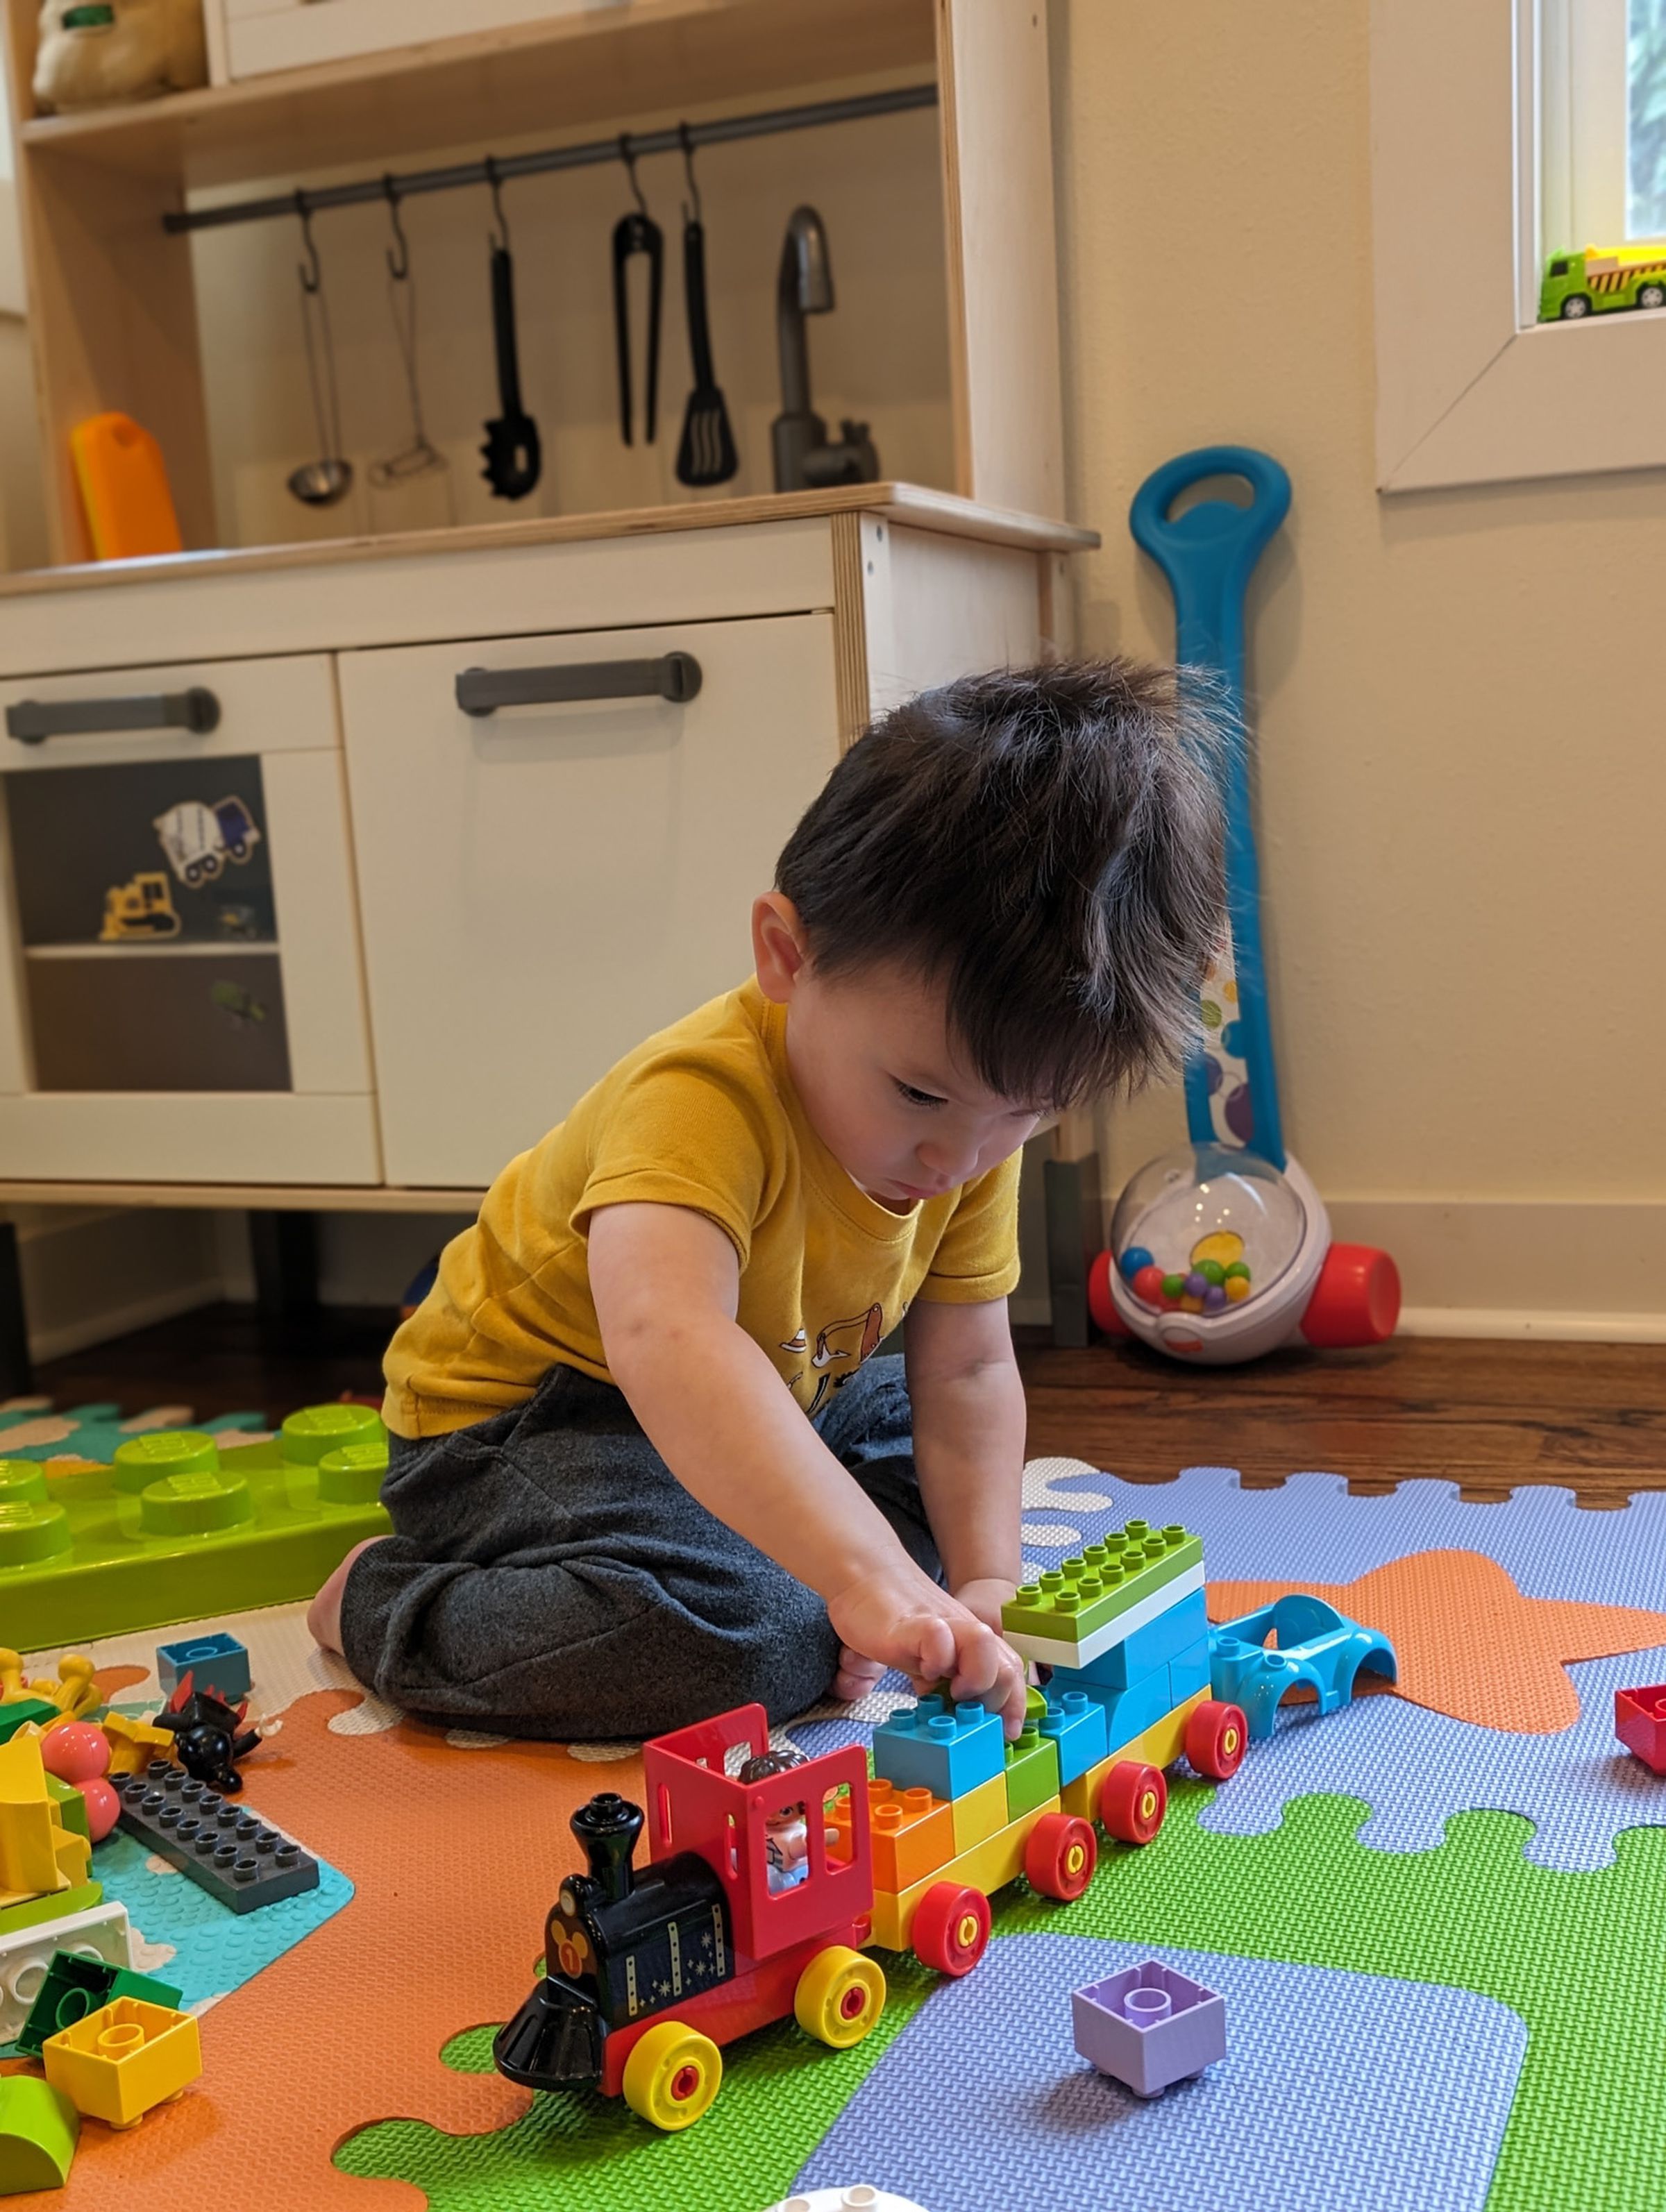 Photo of a toddler playing with Lego toy train